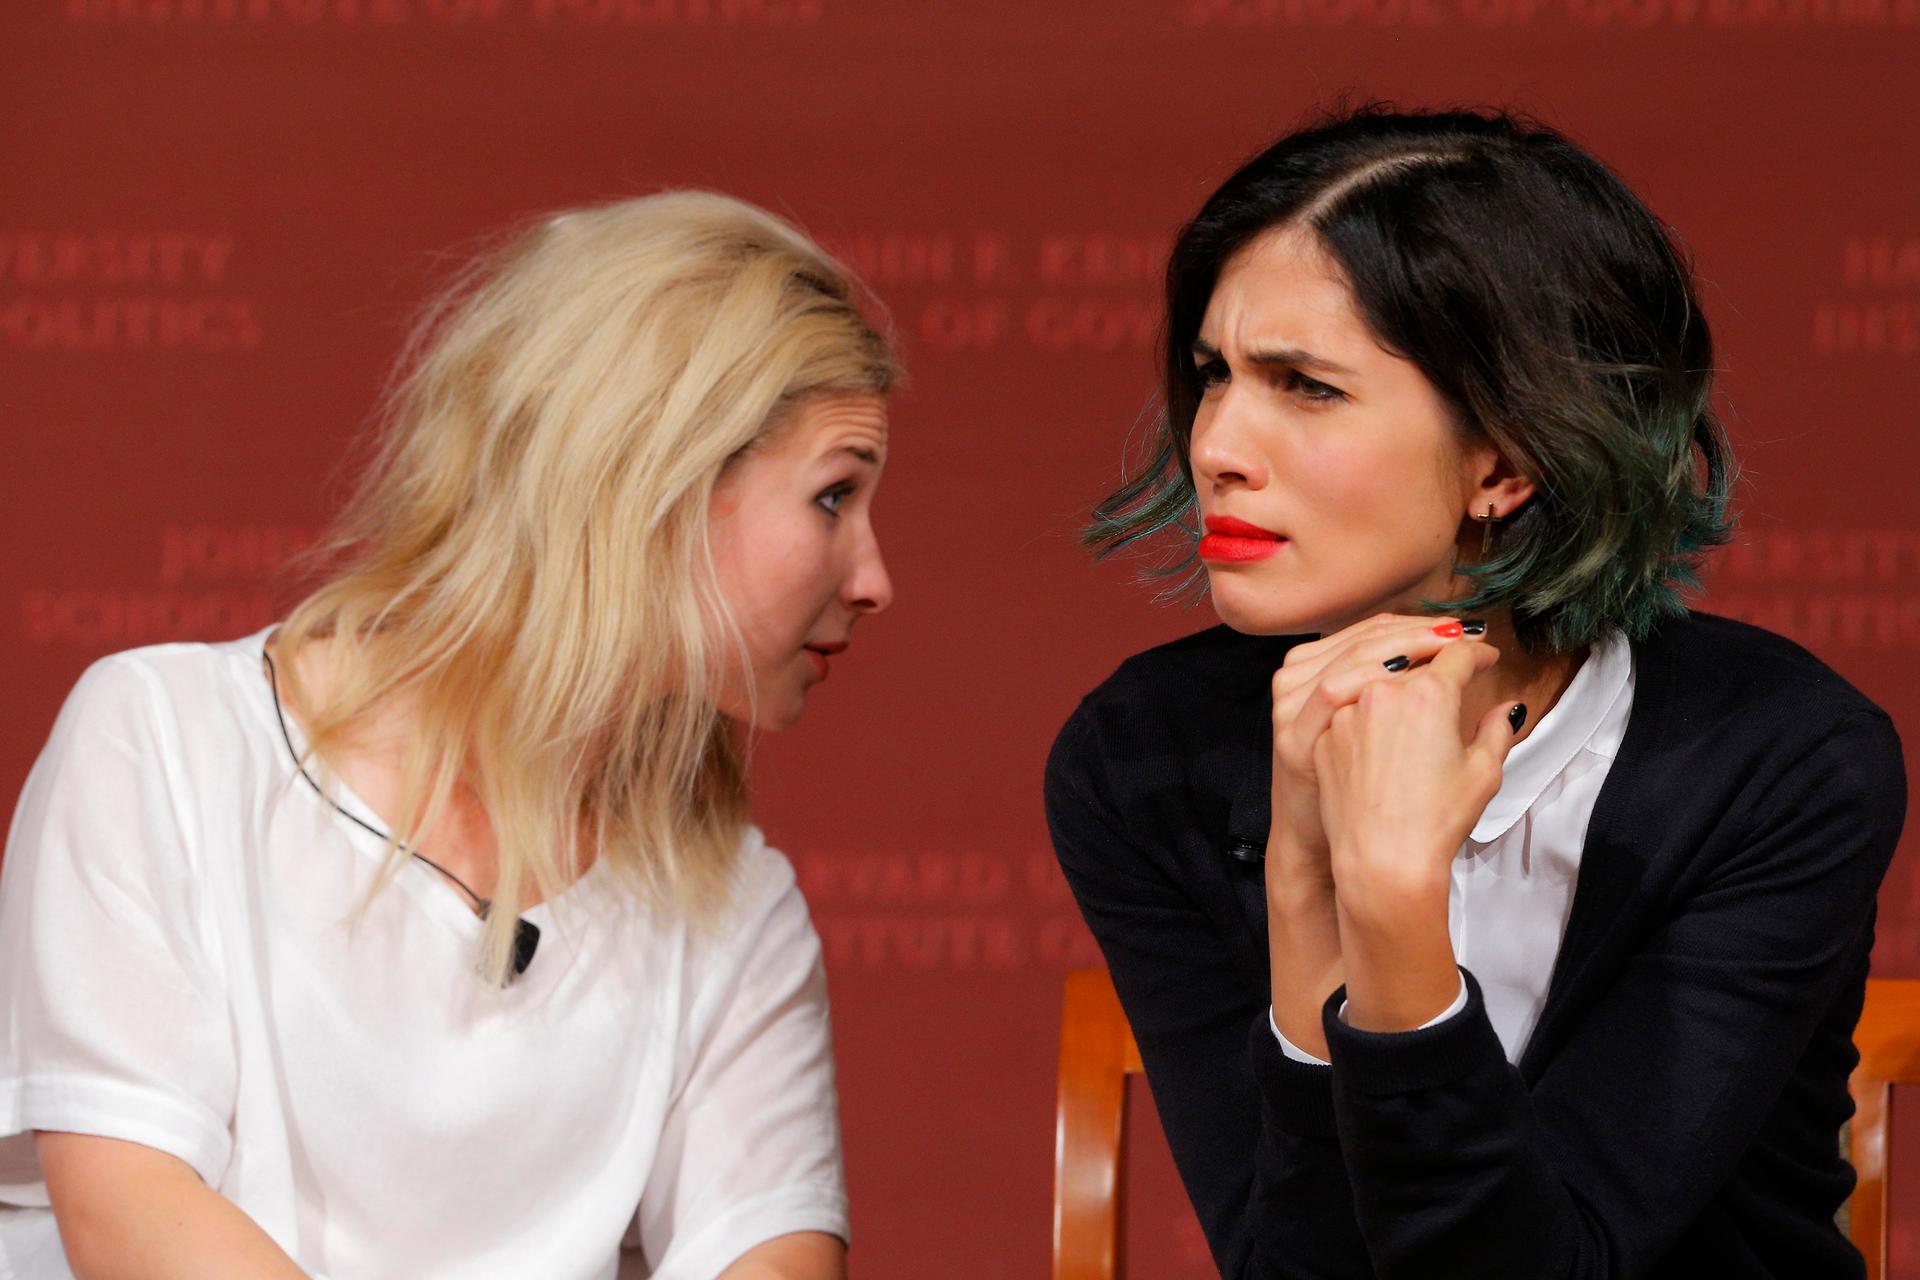 Maria Alyokhina (L) and Nadezhda Tolokonnikova, members of the punk collective Pussy Riot, listen to a question from the audience during a forum at Harvard's Kennedy School of Government, a few days before they made an appearance in Ann Arbor, MI.  